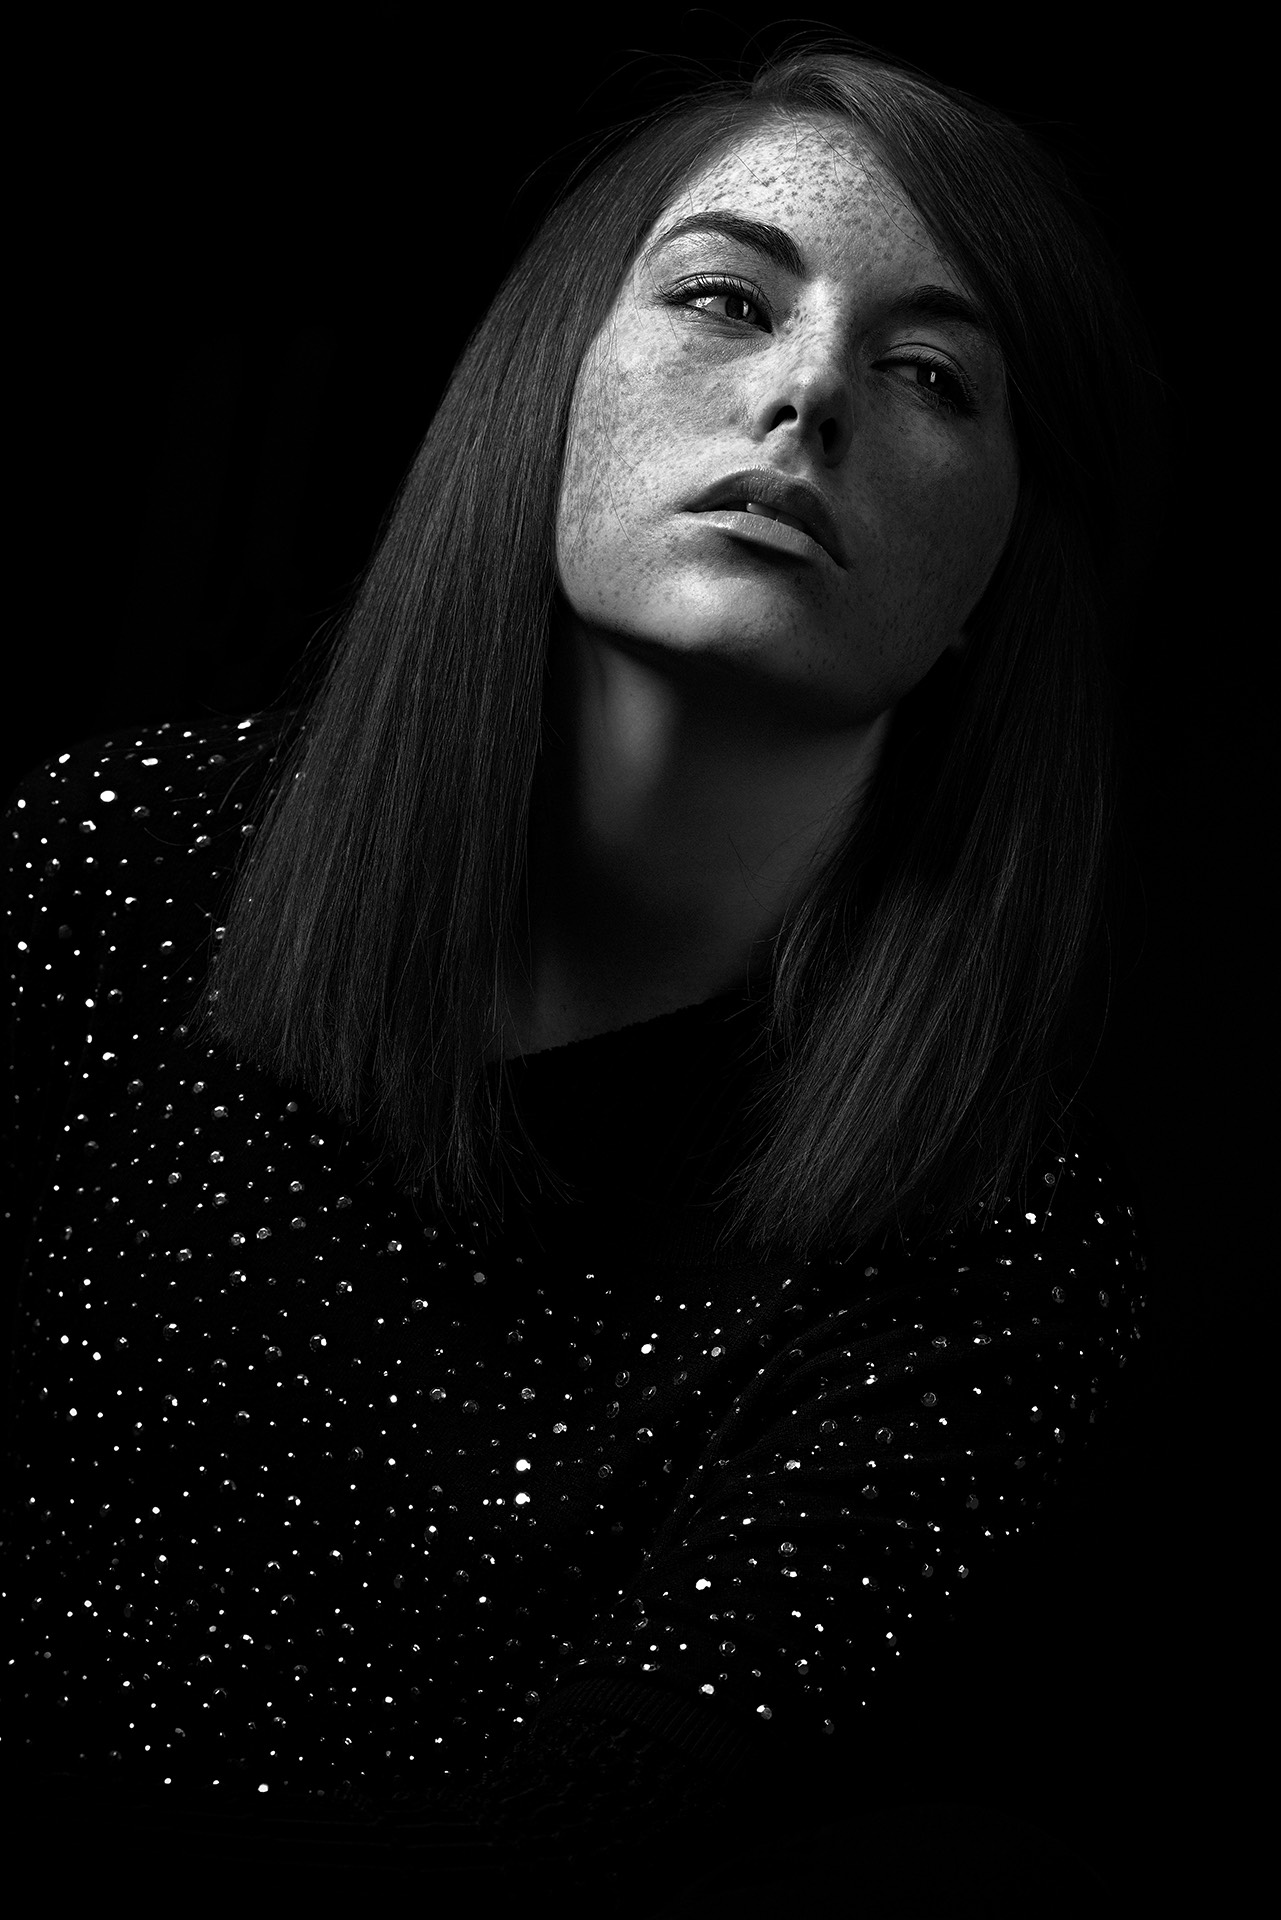 A pure black and white portrait in flash light.